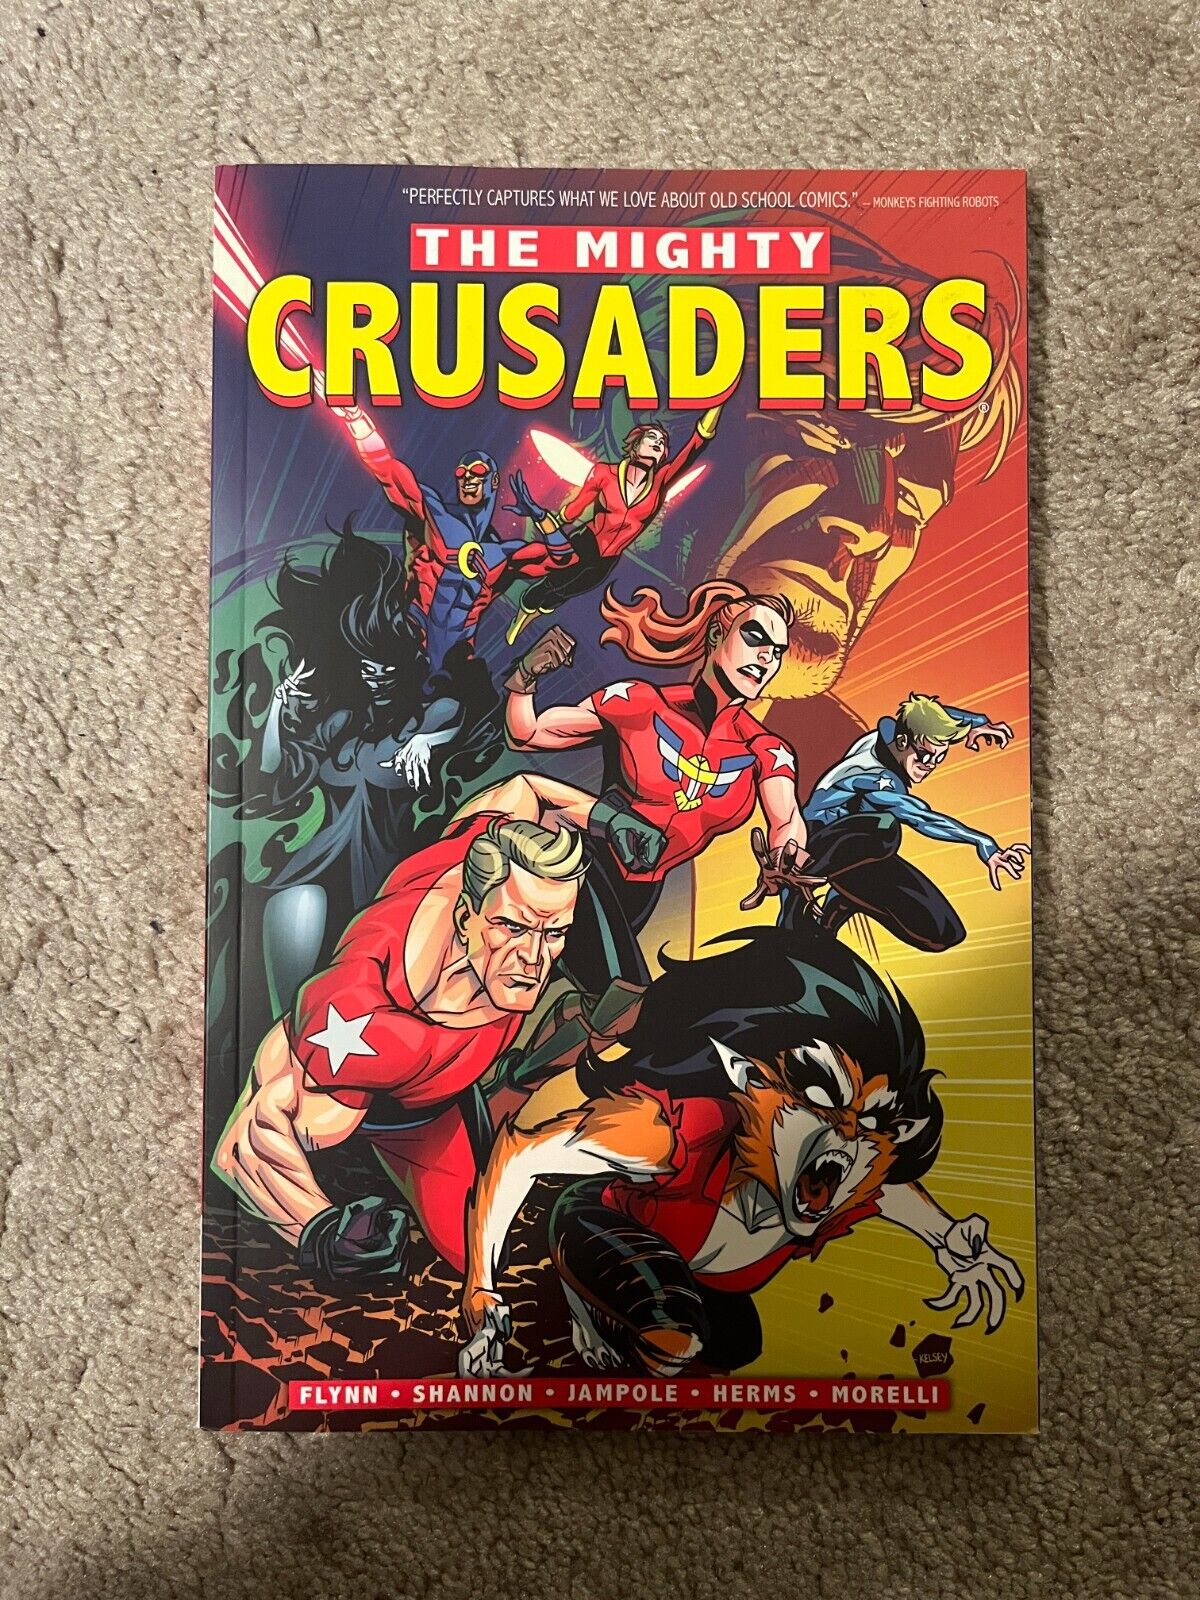 Archie Dark Circle Comics THE MIGHTY CRUSADERS TPB collects #1-4